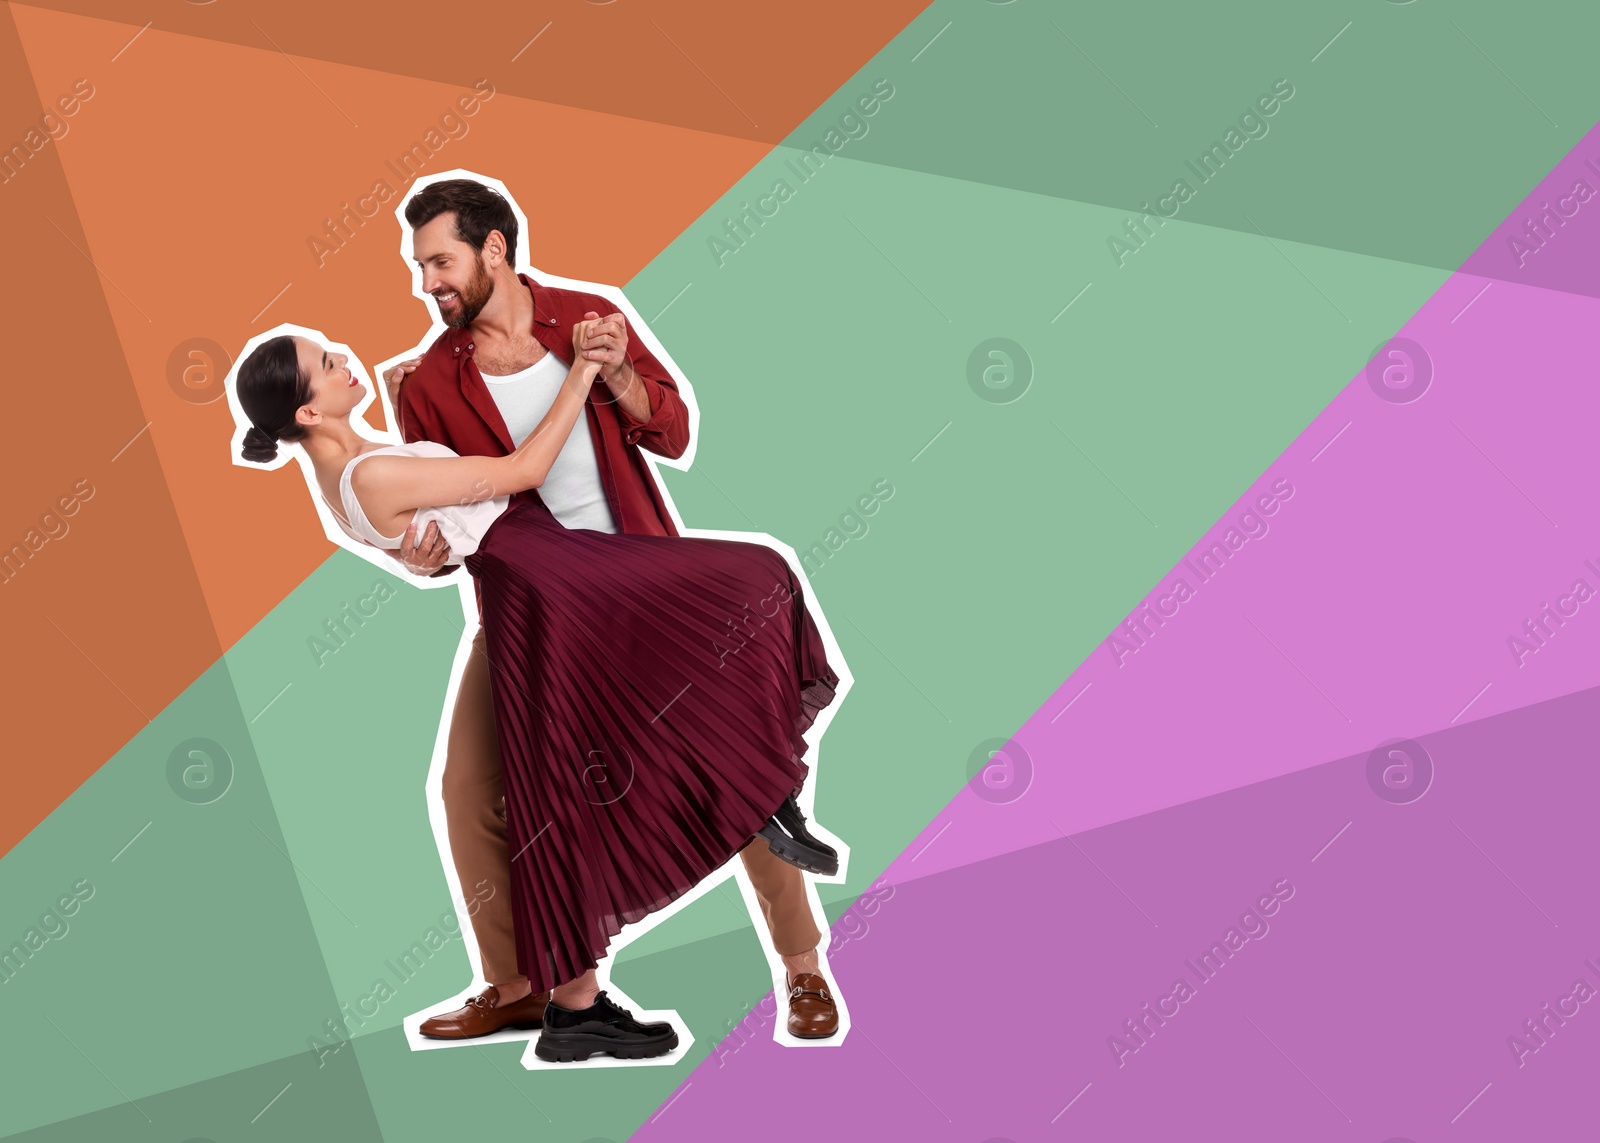 Image of Pop art poster. Couple dancing on bright striped background, pin up style